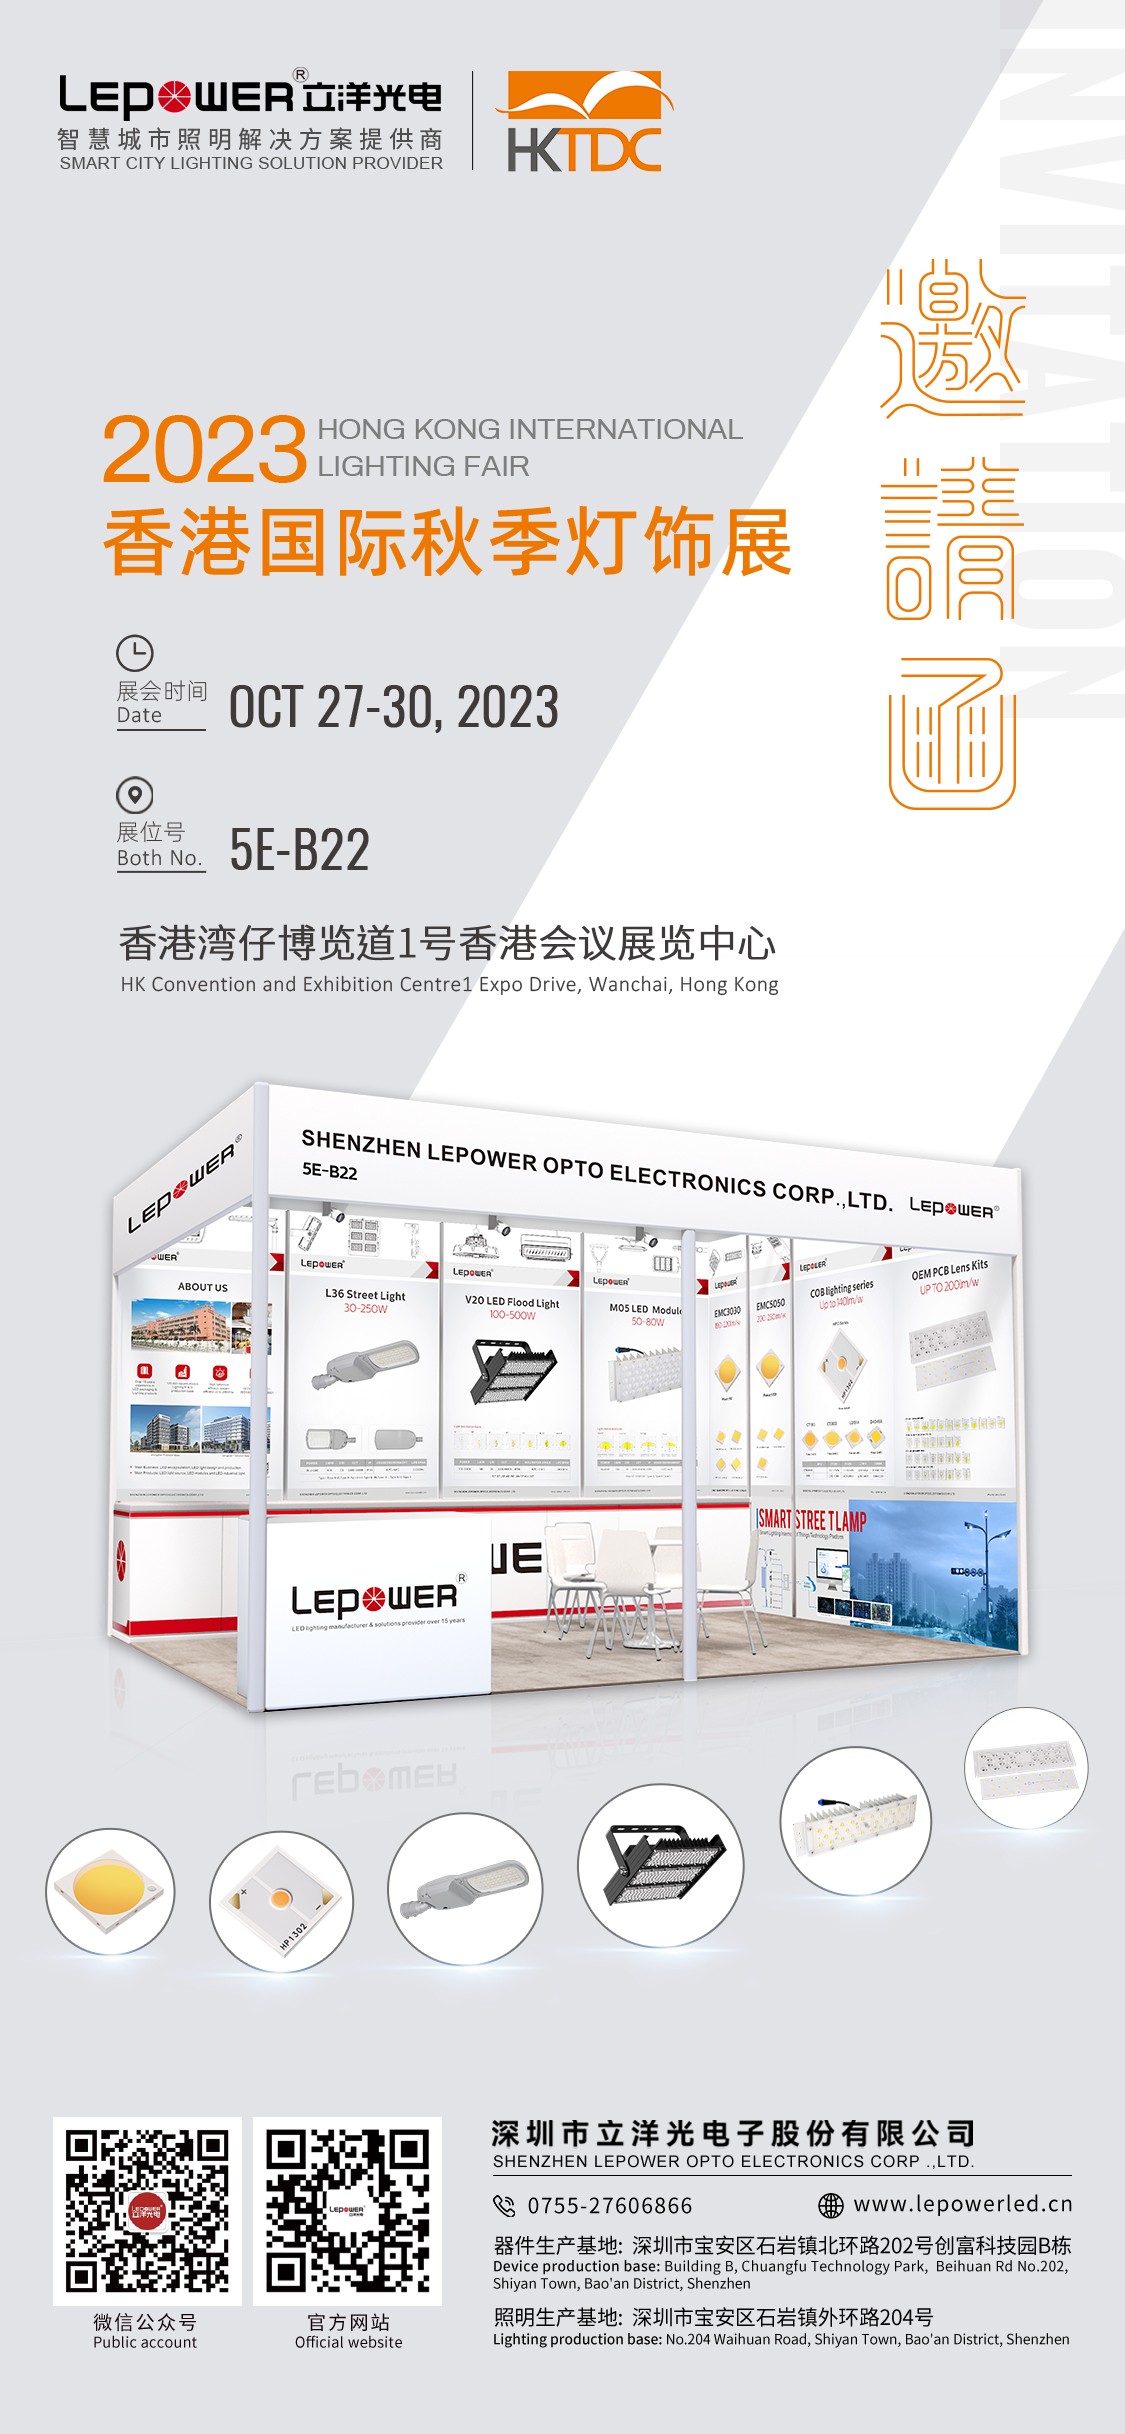 Exhibition Trailer: Lepower Optoelectronics cordially invites us to meet at the 2023 Hong Kong International Autumn Exhibition!